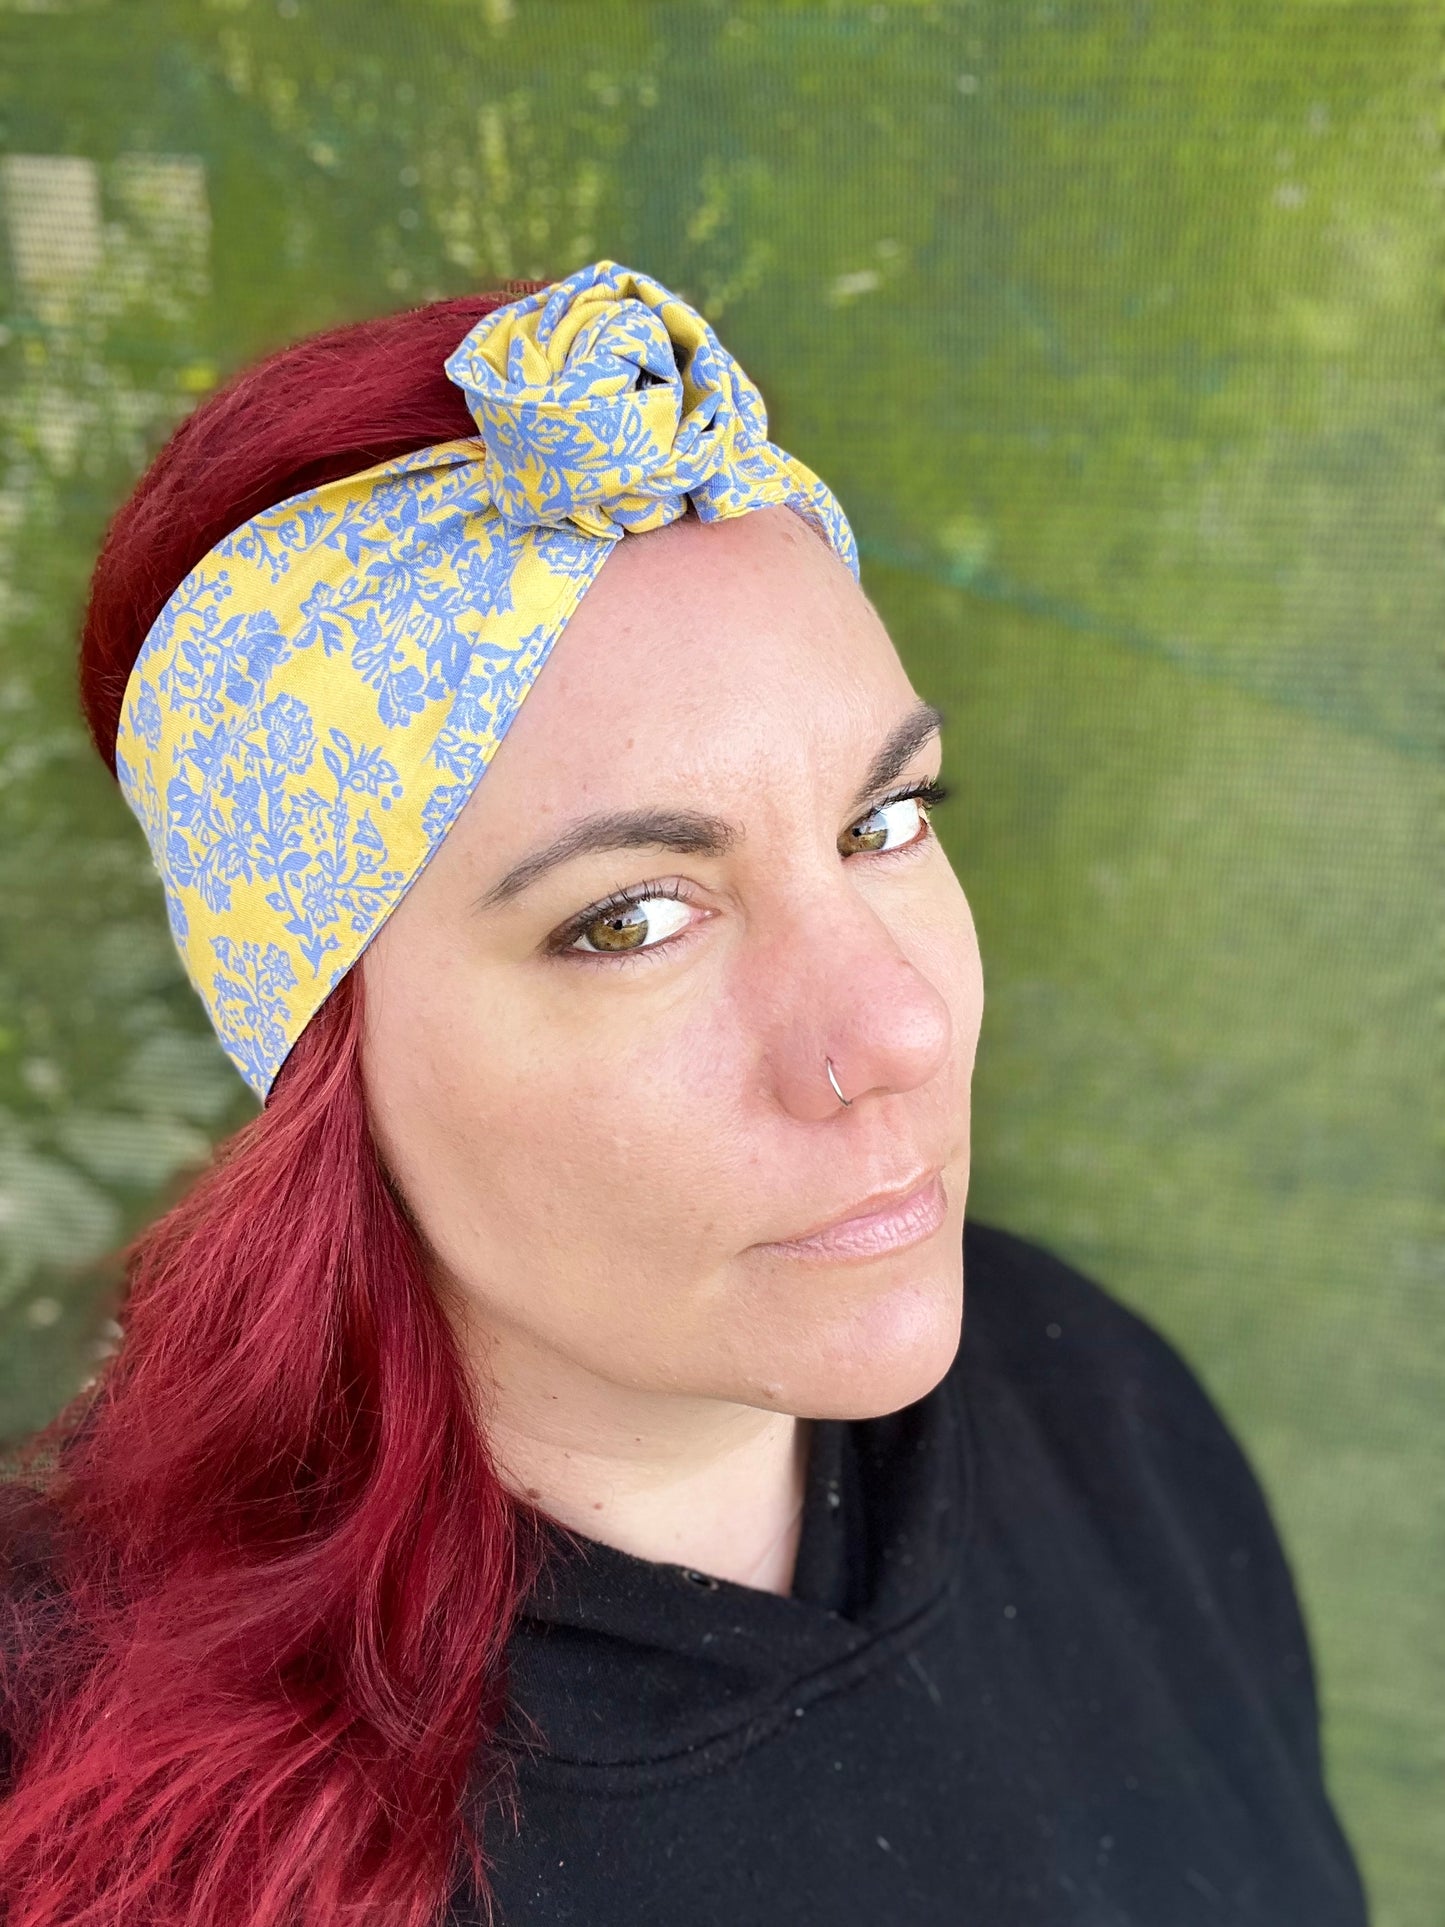 Vintage Blue Floral Boho Wire Headband - Bae Bands Australia Twist Bow Wire Headband allows for your headband to stay in place all day with no headaches,